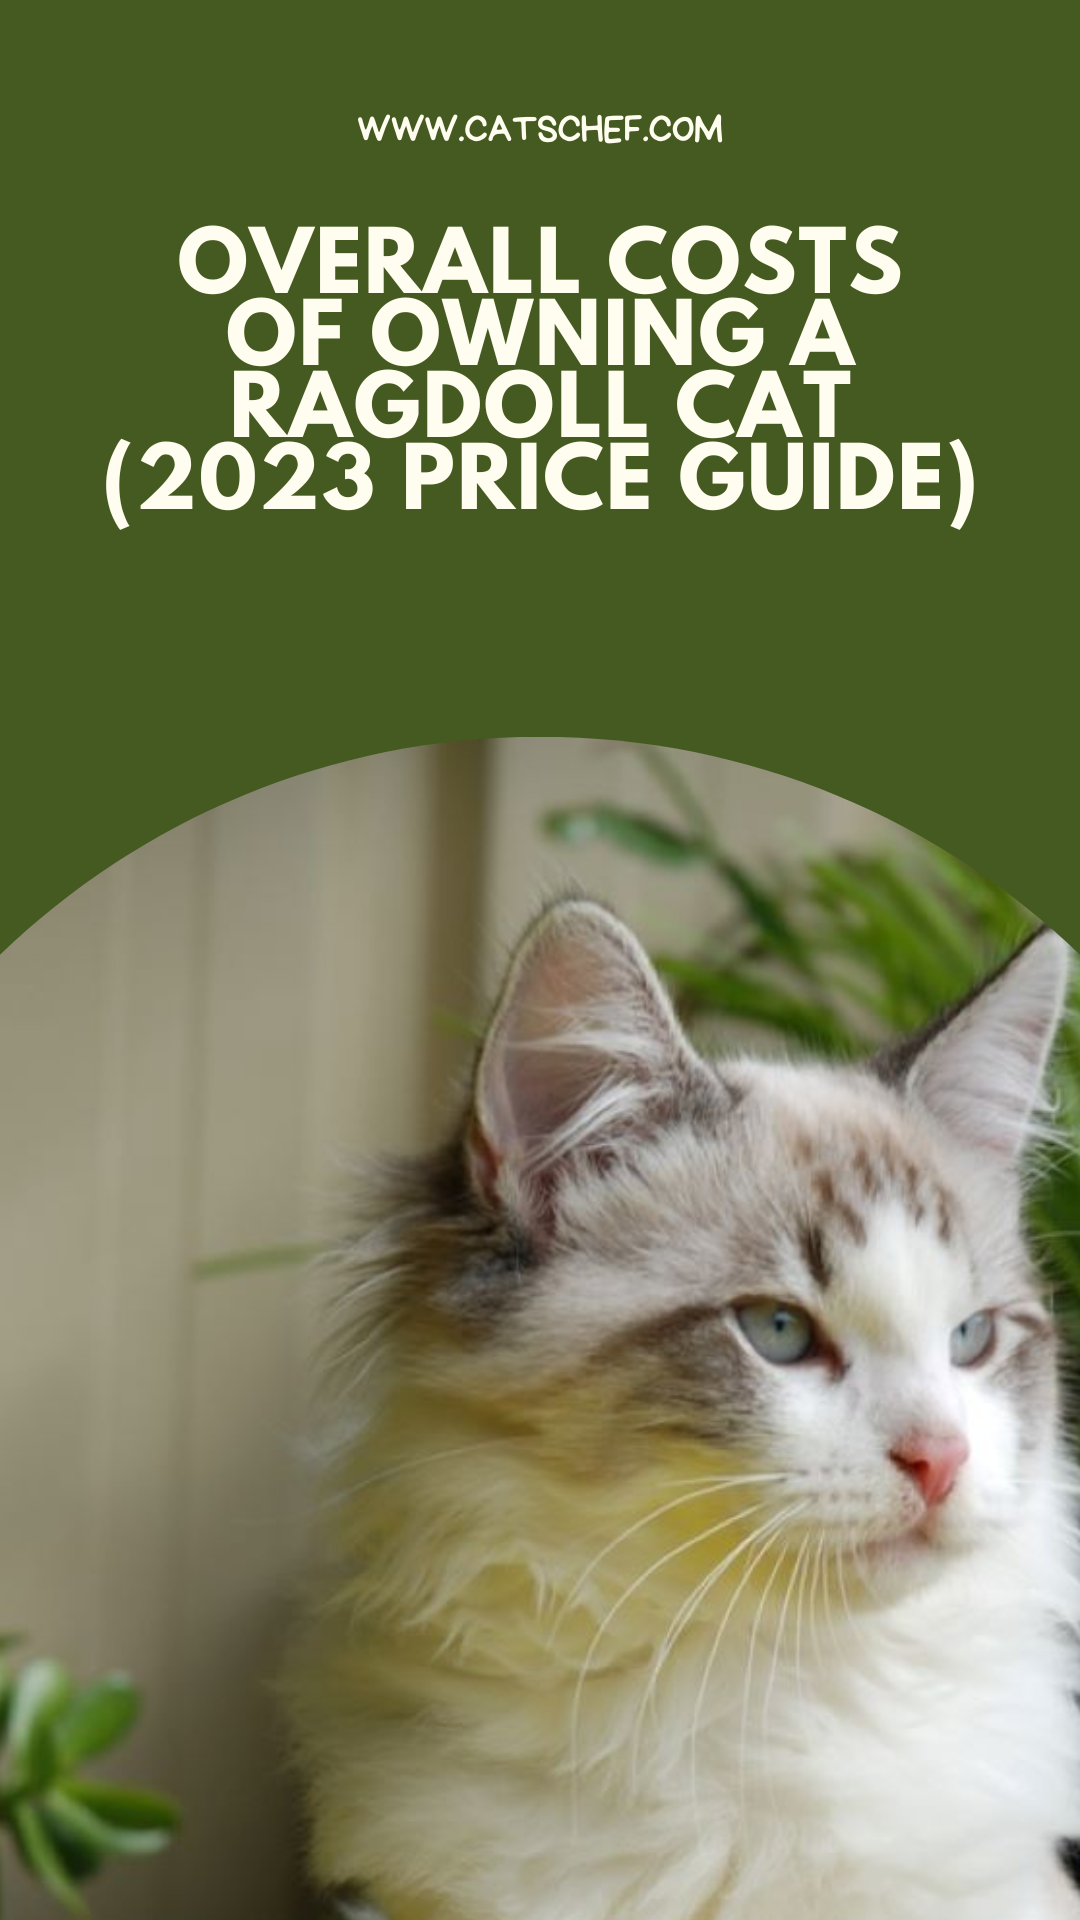 Overall Costs Of Owning A Ragdoll Cat (2023 Price Guide)